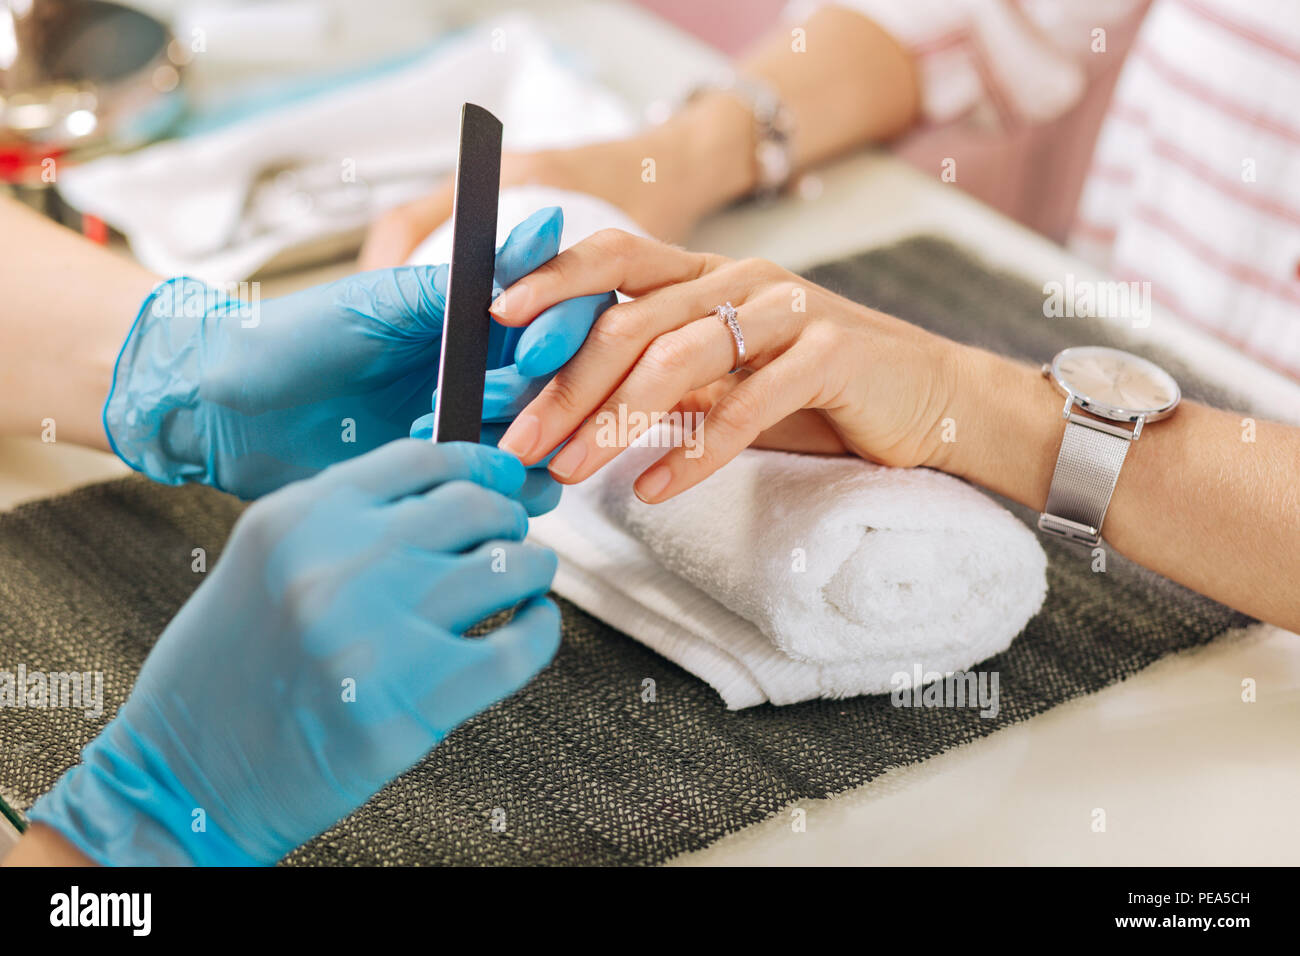 Female hands treating female hands clouse up Stock Photo